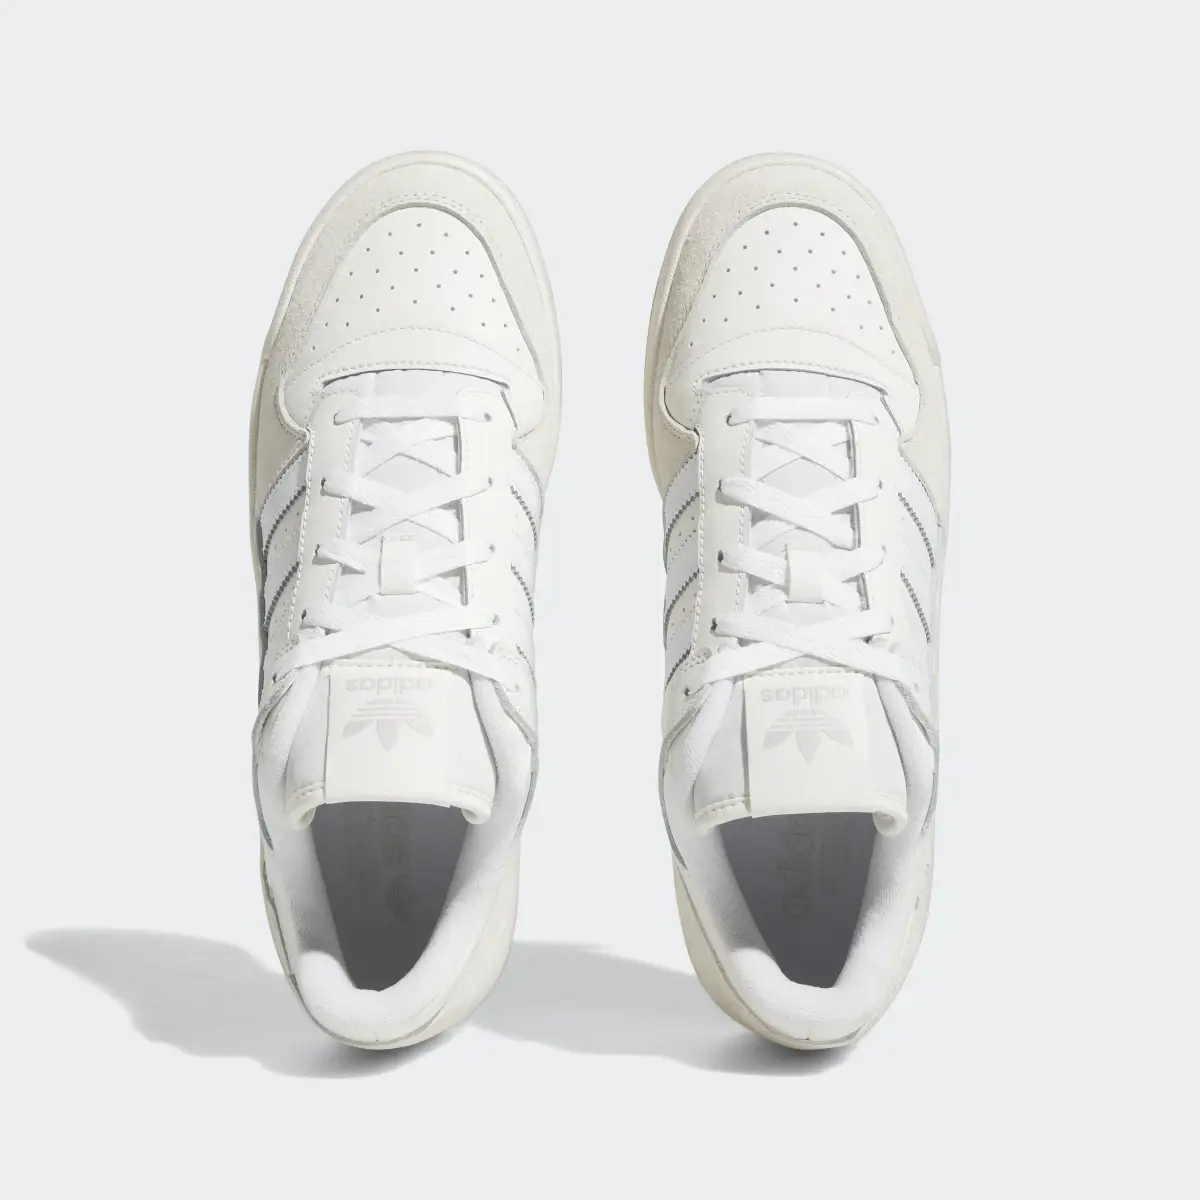 Adidas Forum Low Classic Shoes. 3